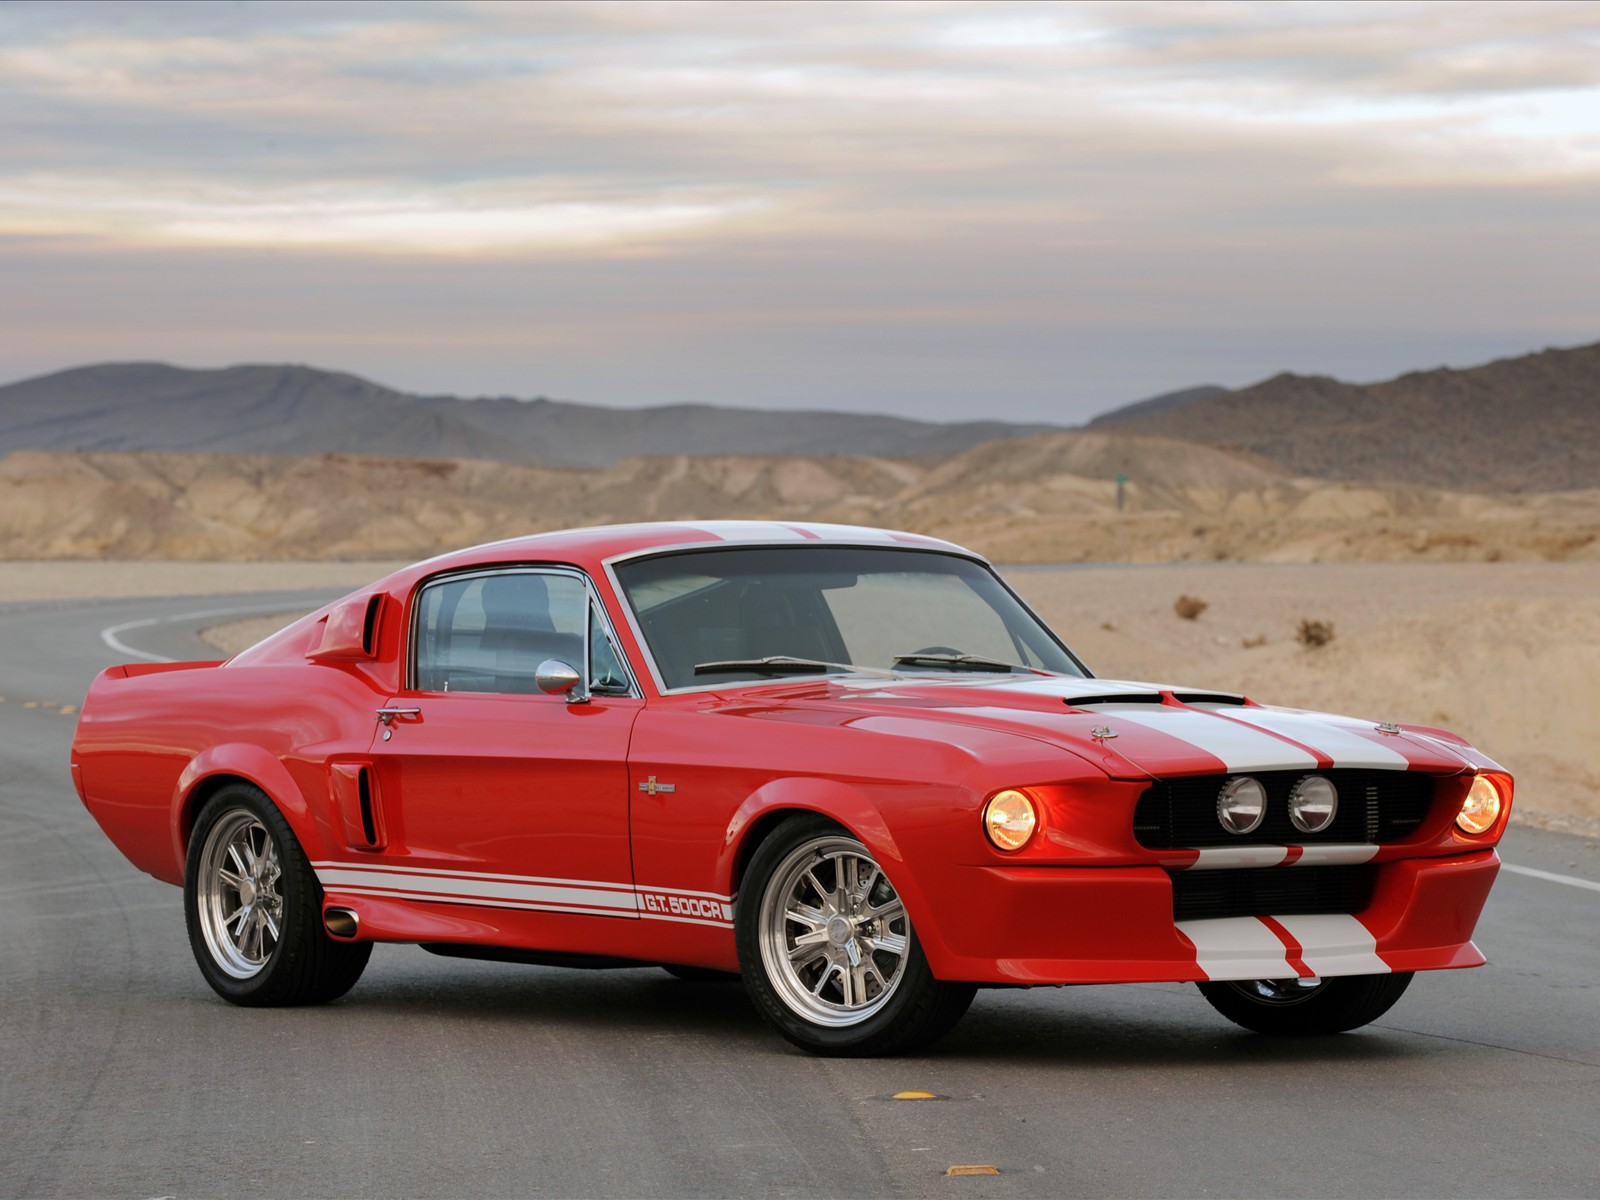 Gt500 Fastback, Ford Mustang Fastback 1967 Wallpaper - Ford Mustang Shelby Gt500 Eleanor Red - HD Wallpaper 